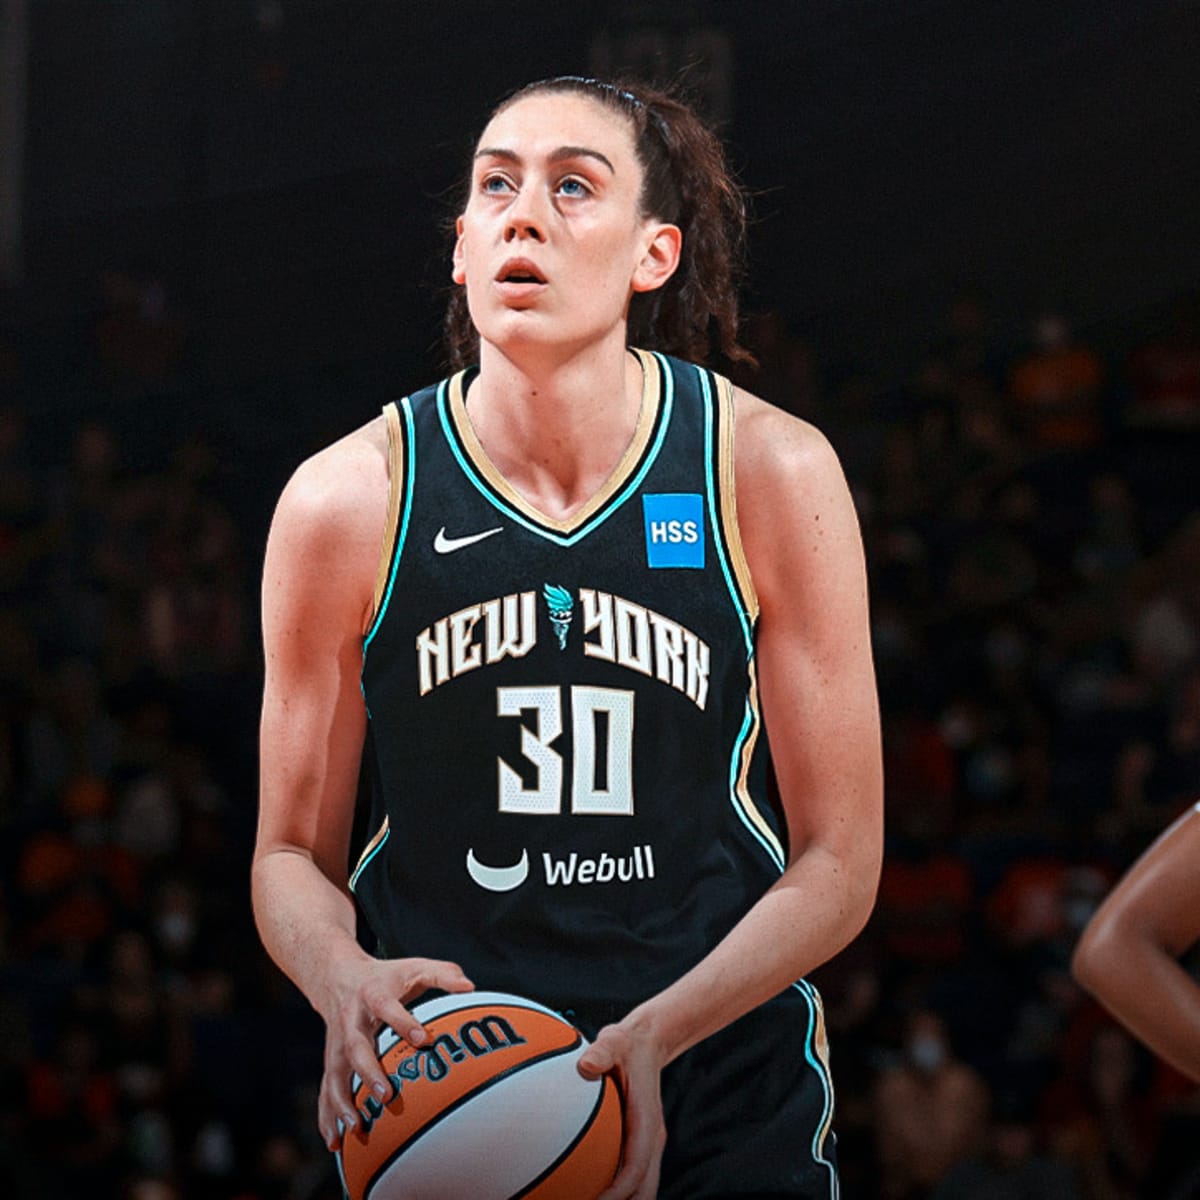 The tip of the sword: Breanna Stewart & a new New York Liberty